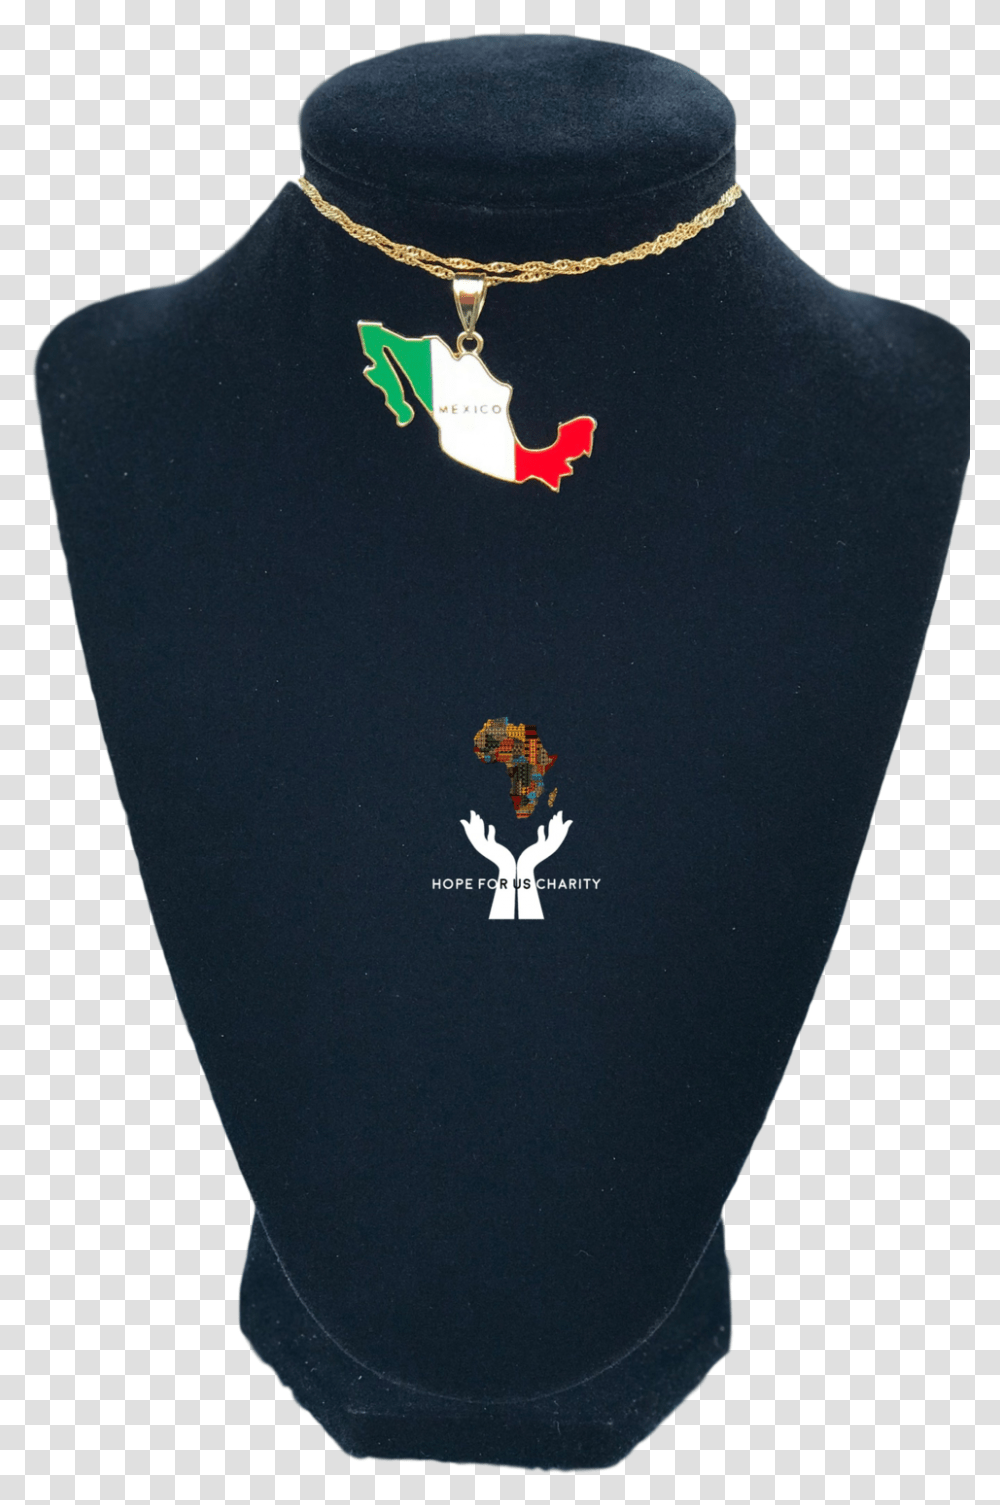 Mexico Colored Flag Clipped Rev 1 The Hope For Us Charity, Tie, Accessories, Logo Transparent Png